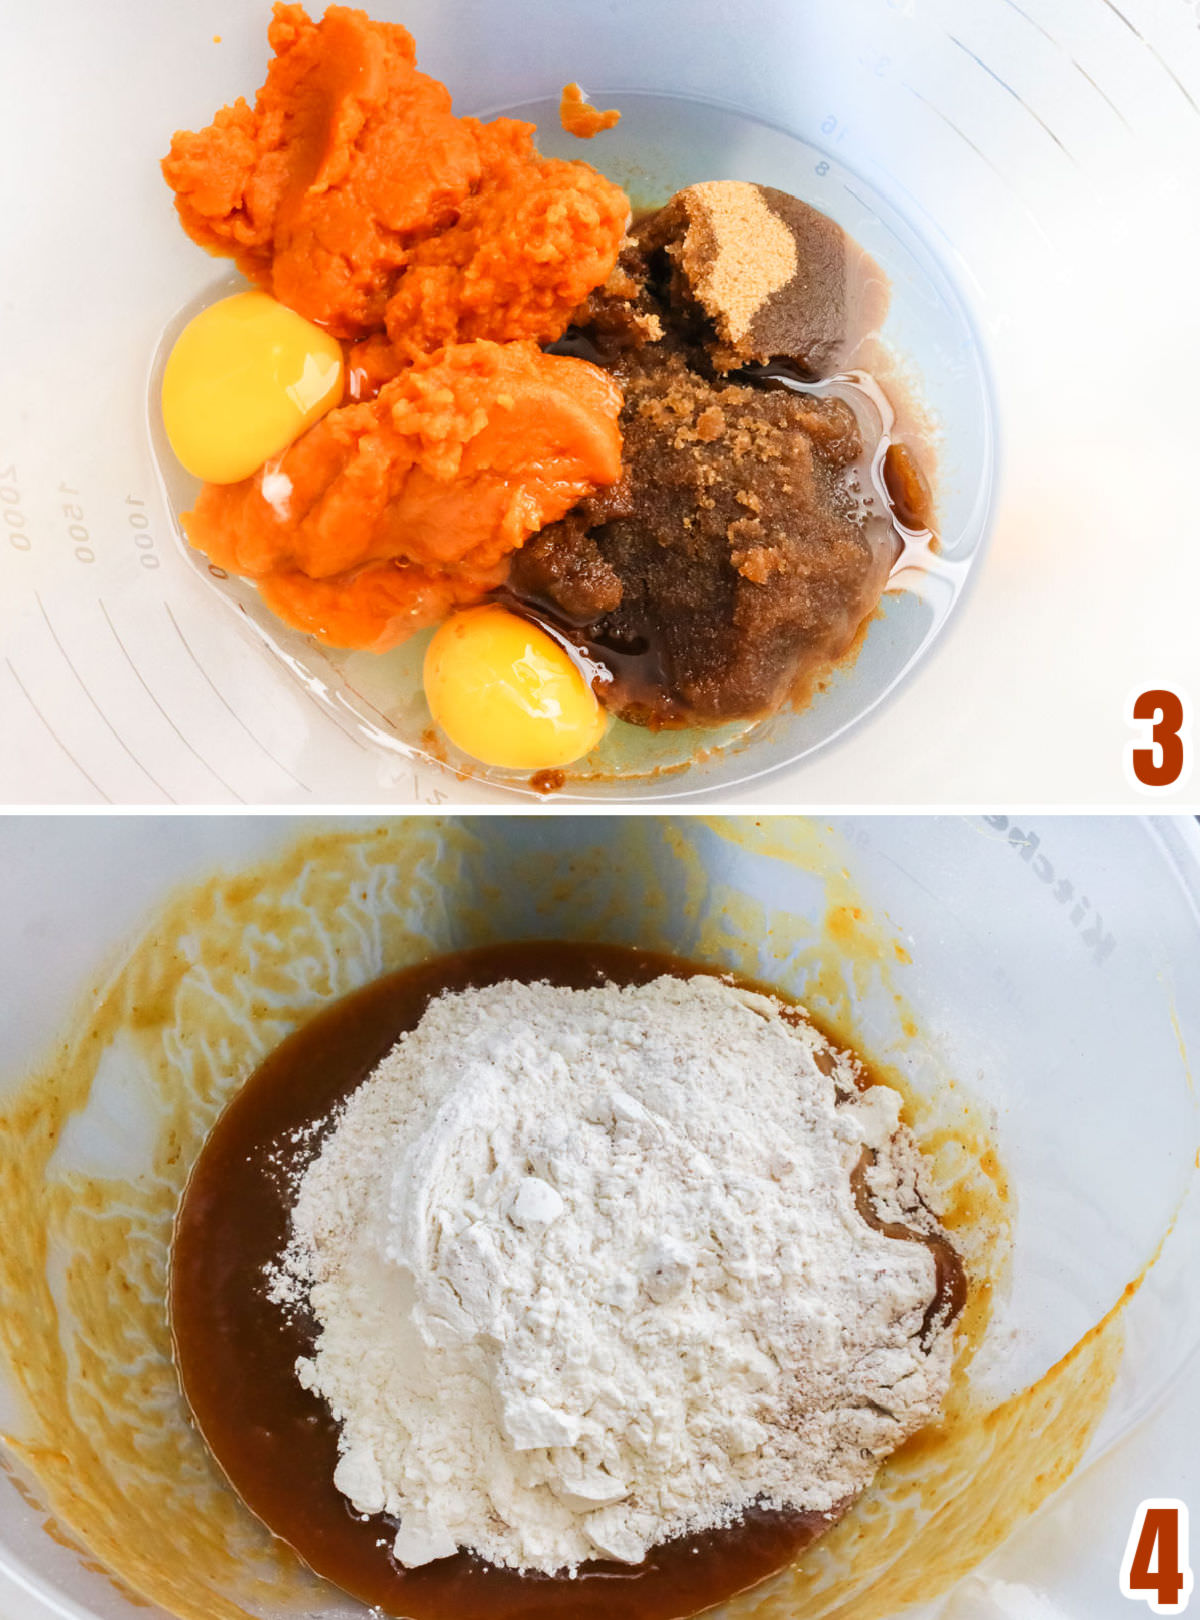 Collage image showing how to mix the wet ingredients and how to add the dry ingredients to the wet ingredients.